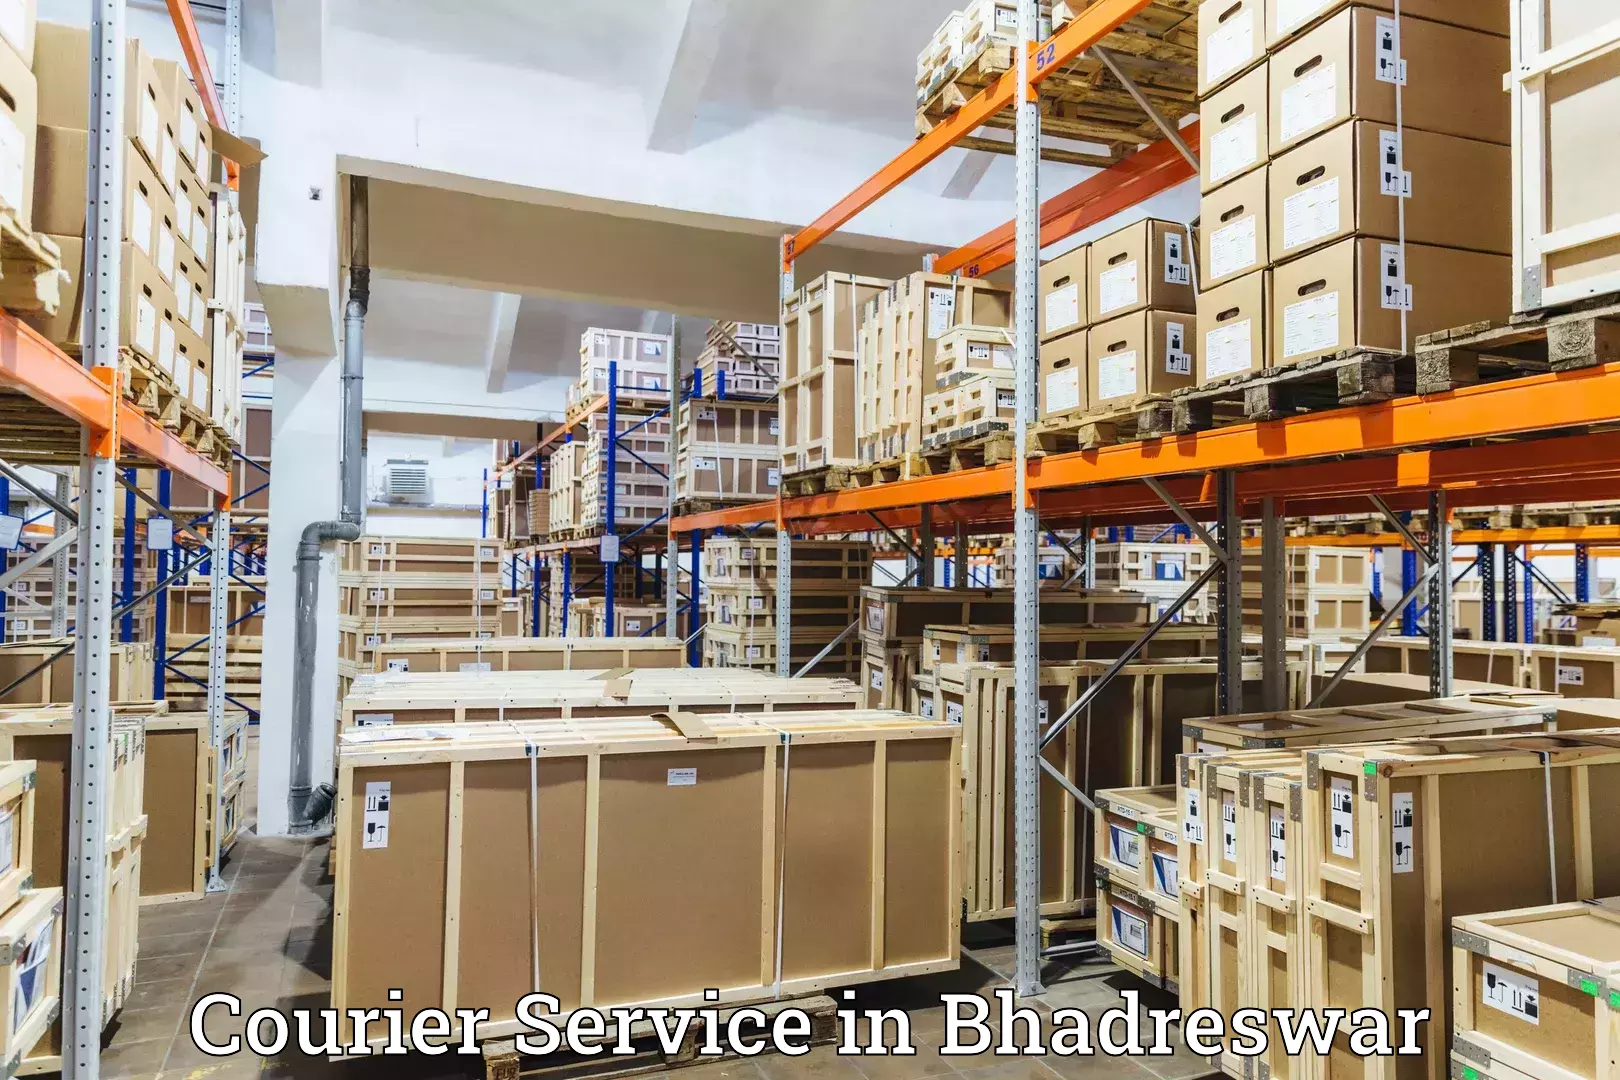 Shipping and handling in Bhadreswar